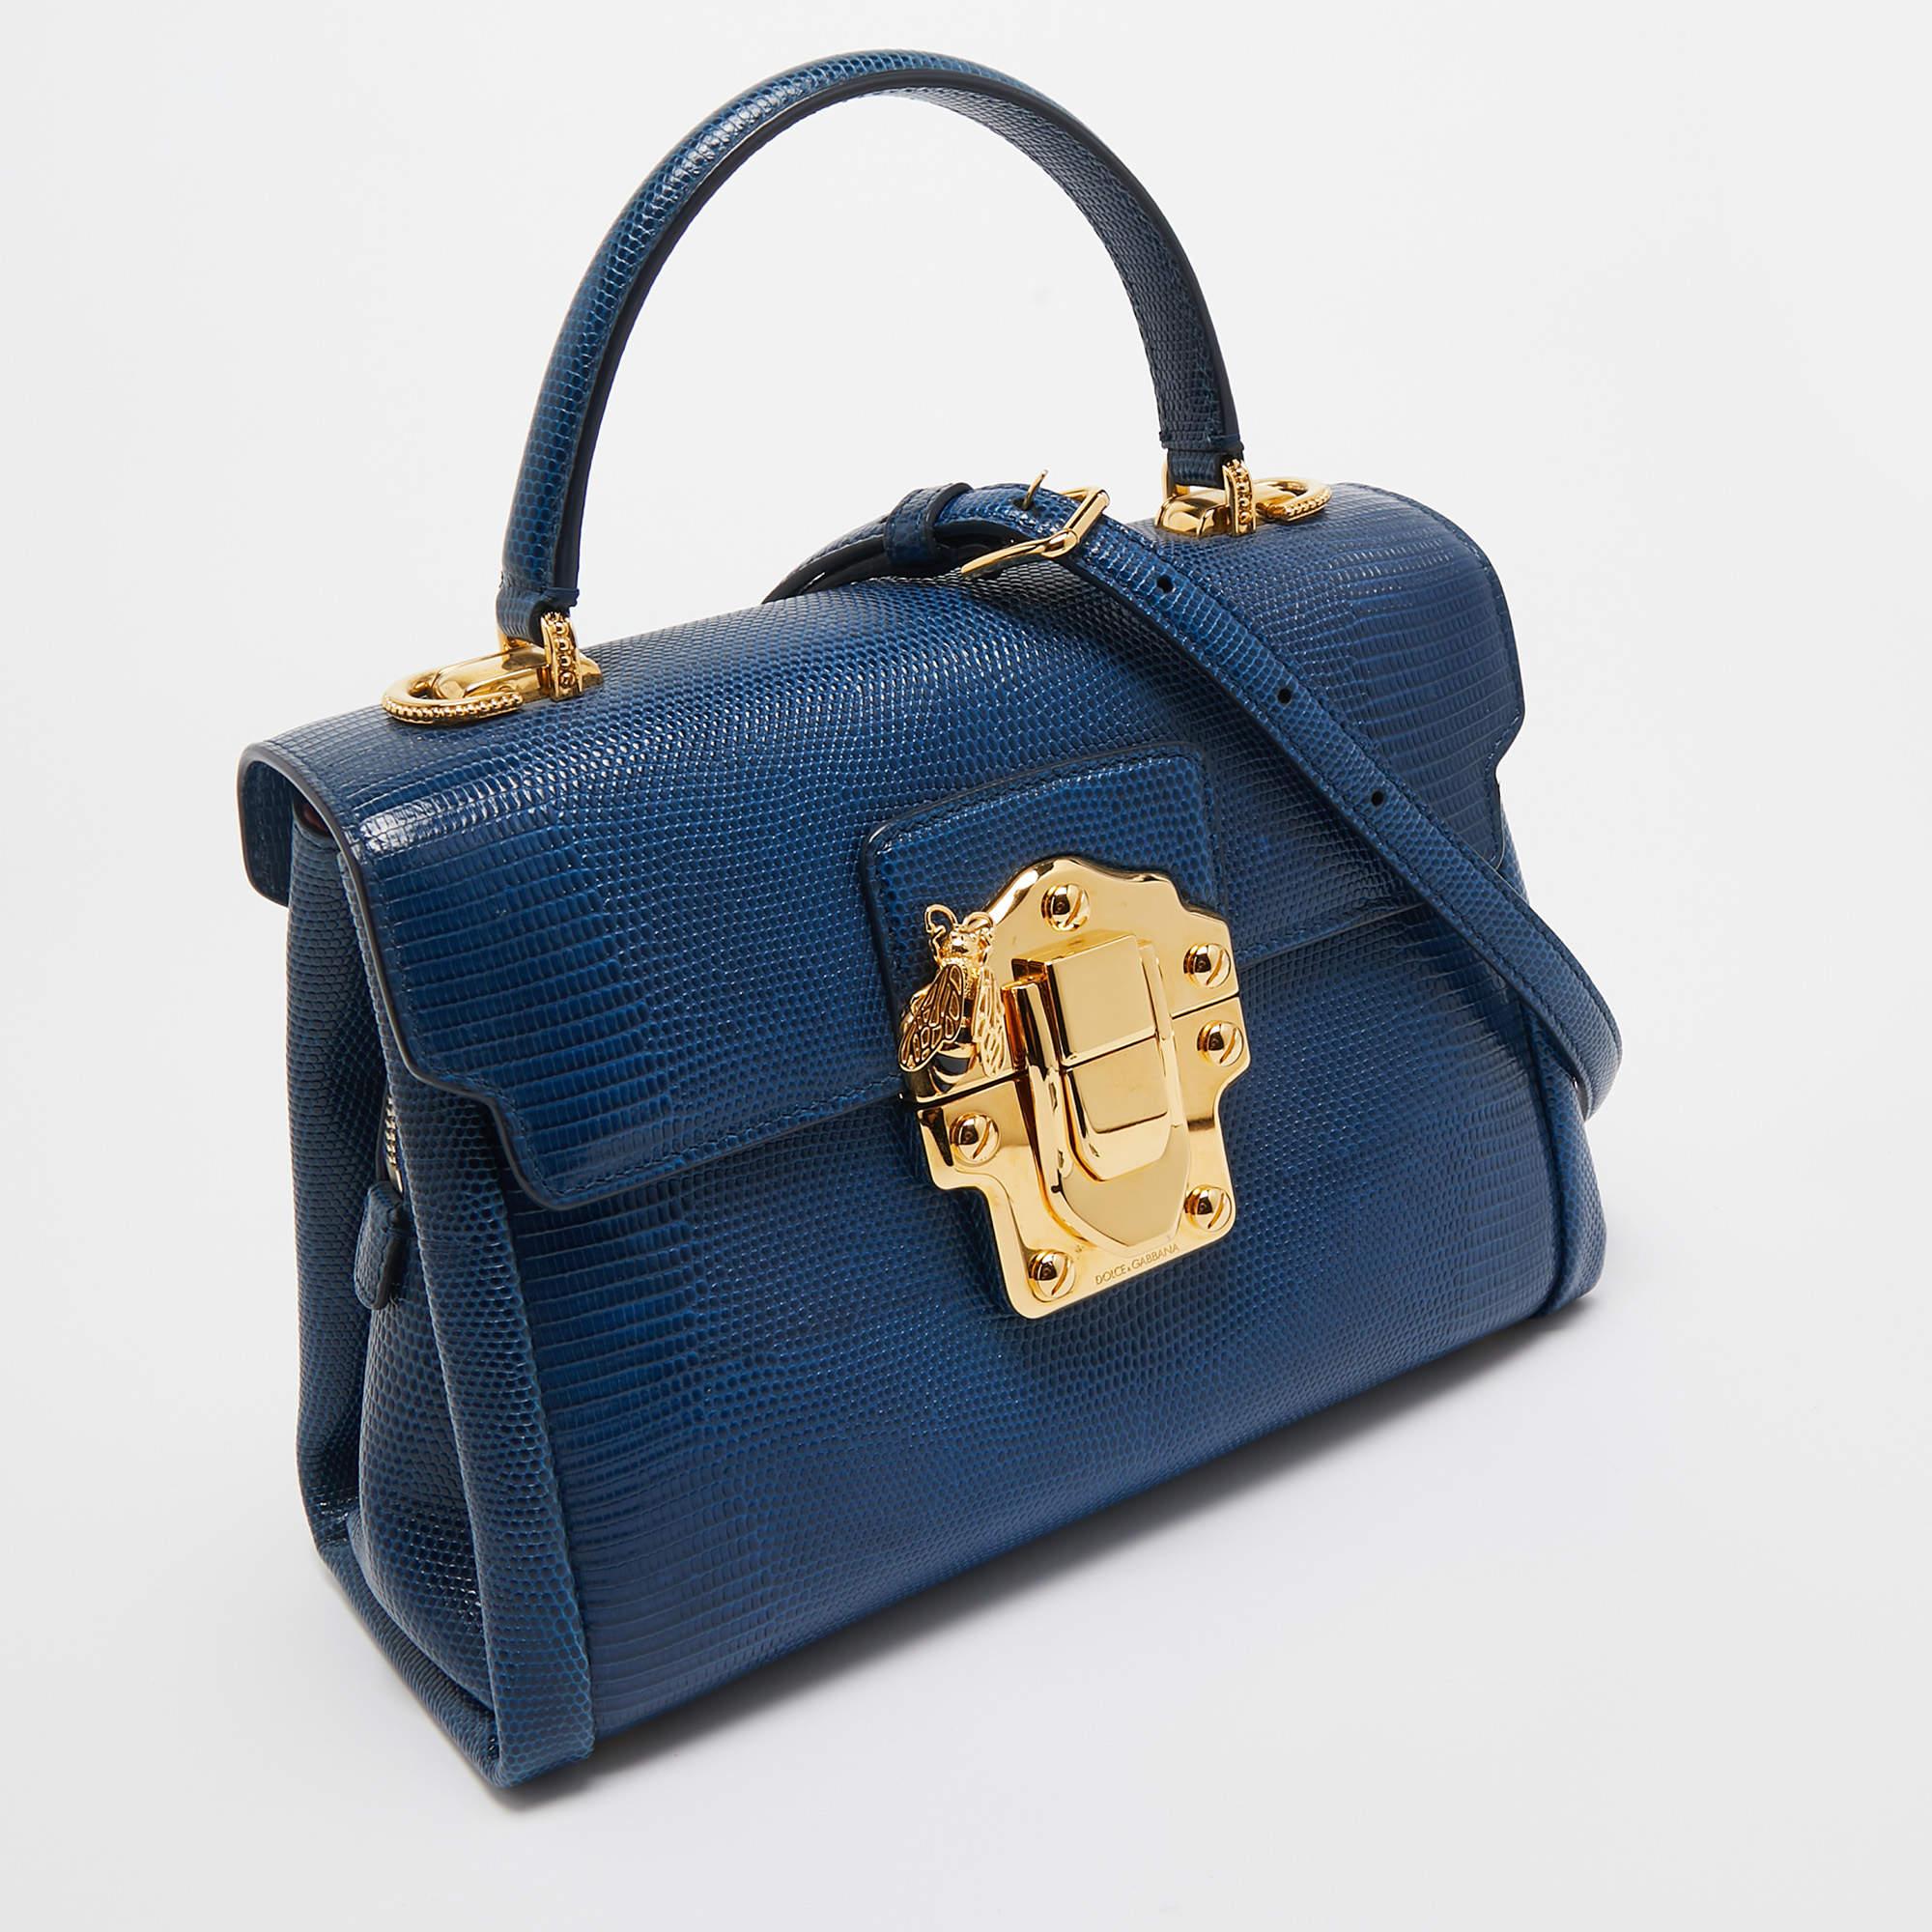 Dolce & Gabbana Blue Lizard Embossed Leather Lucia Top Handle Bag For Sale 2